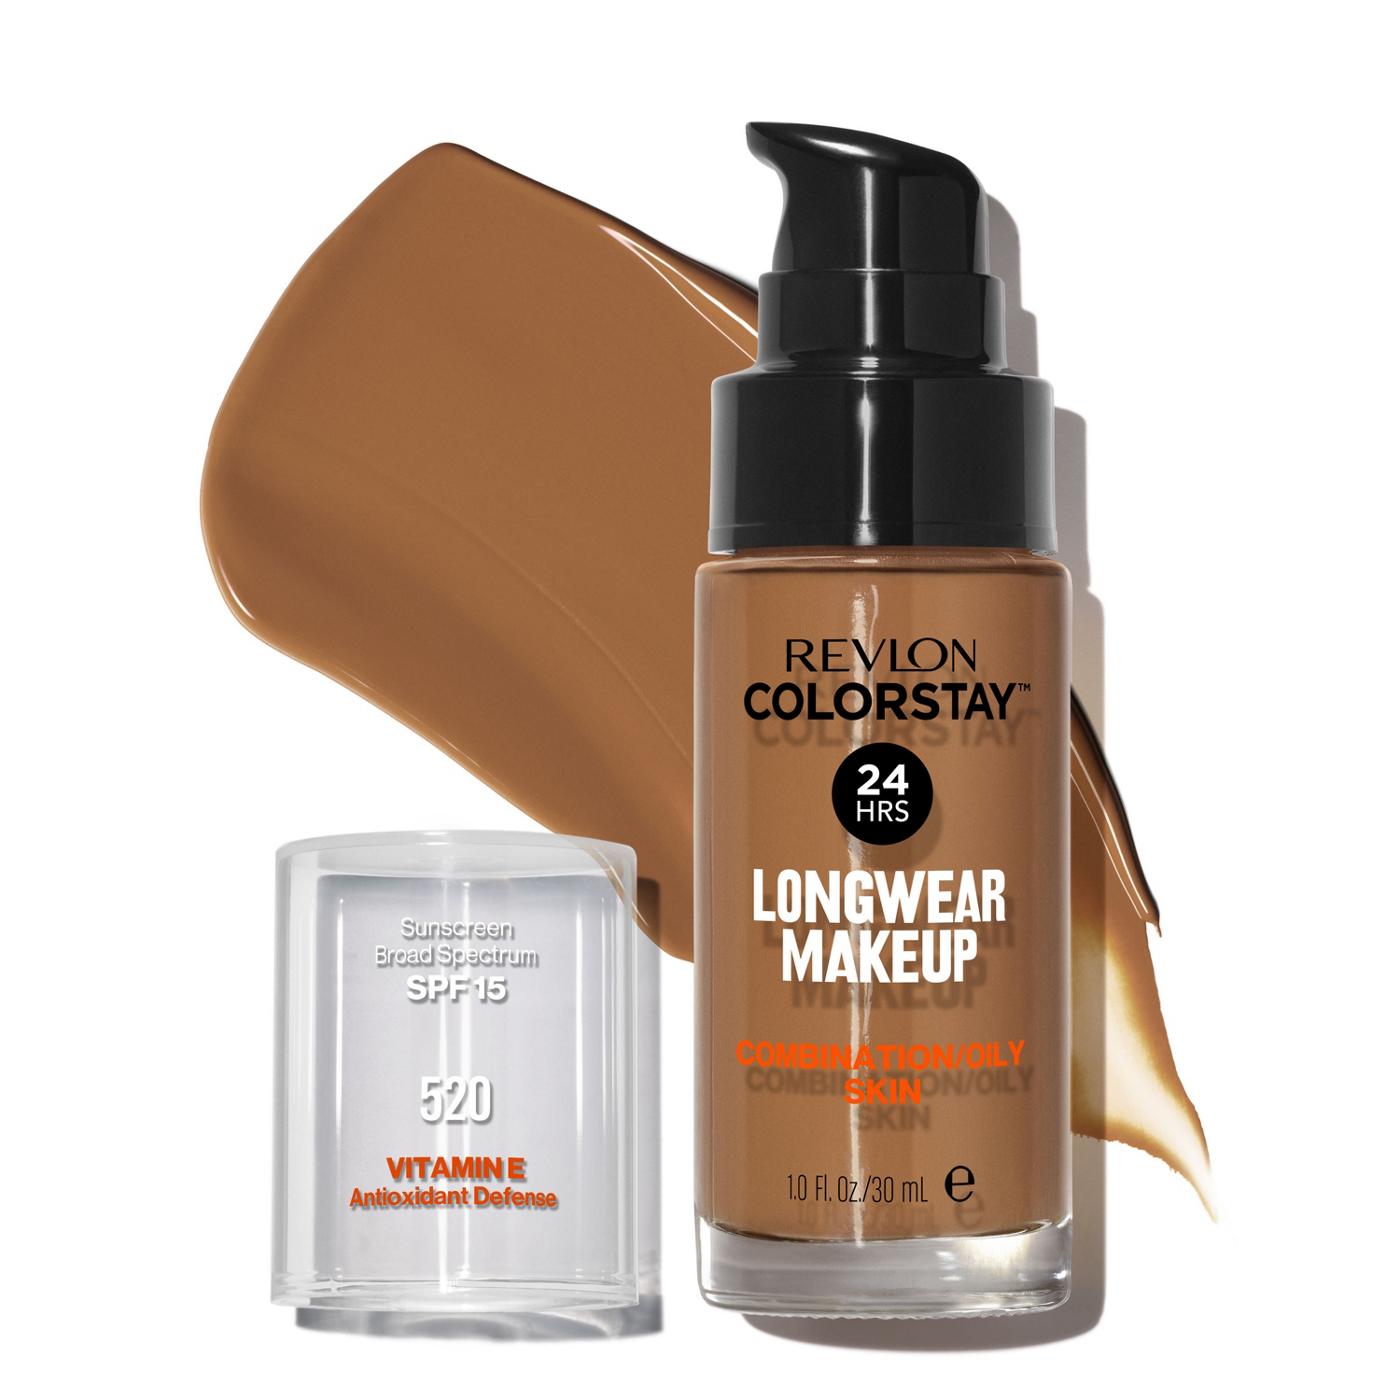 Revlon ColorStay Longwear Makeup Foundation - Cocoa Cacao; image 1 of 6